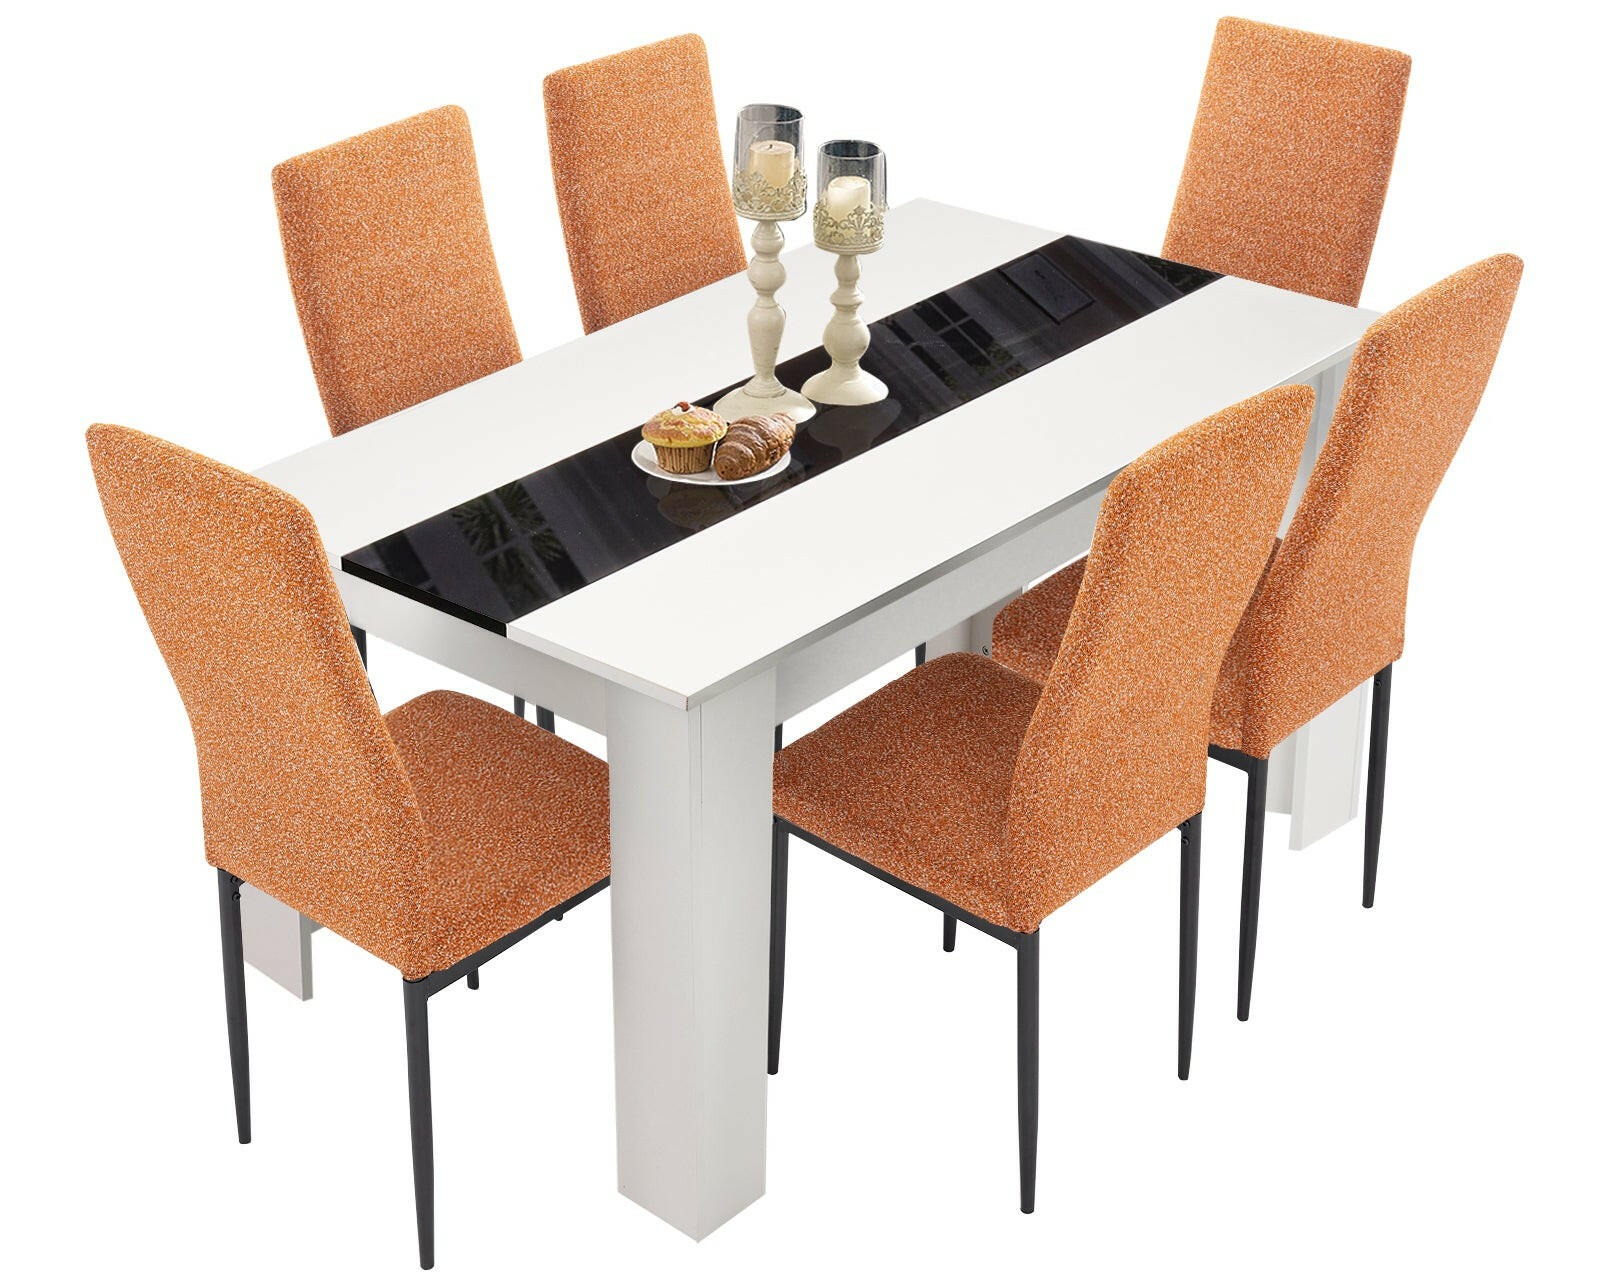 spacesaver table and chairs